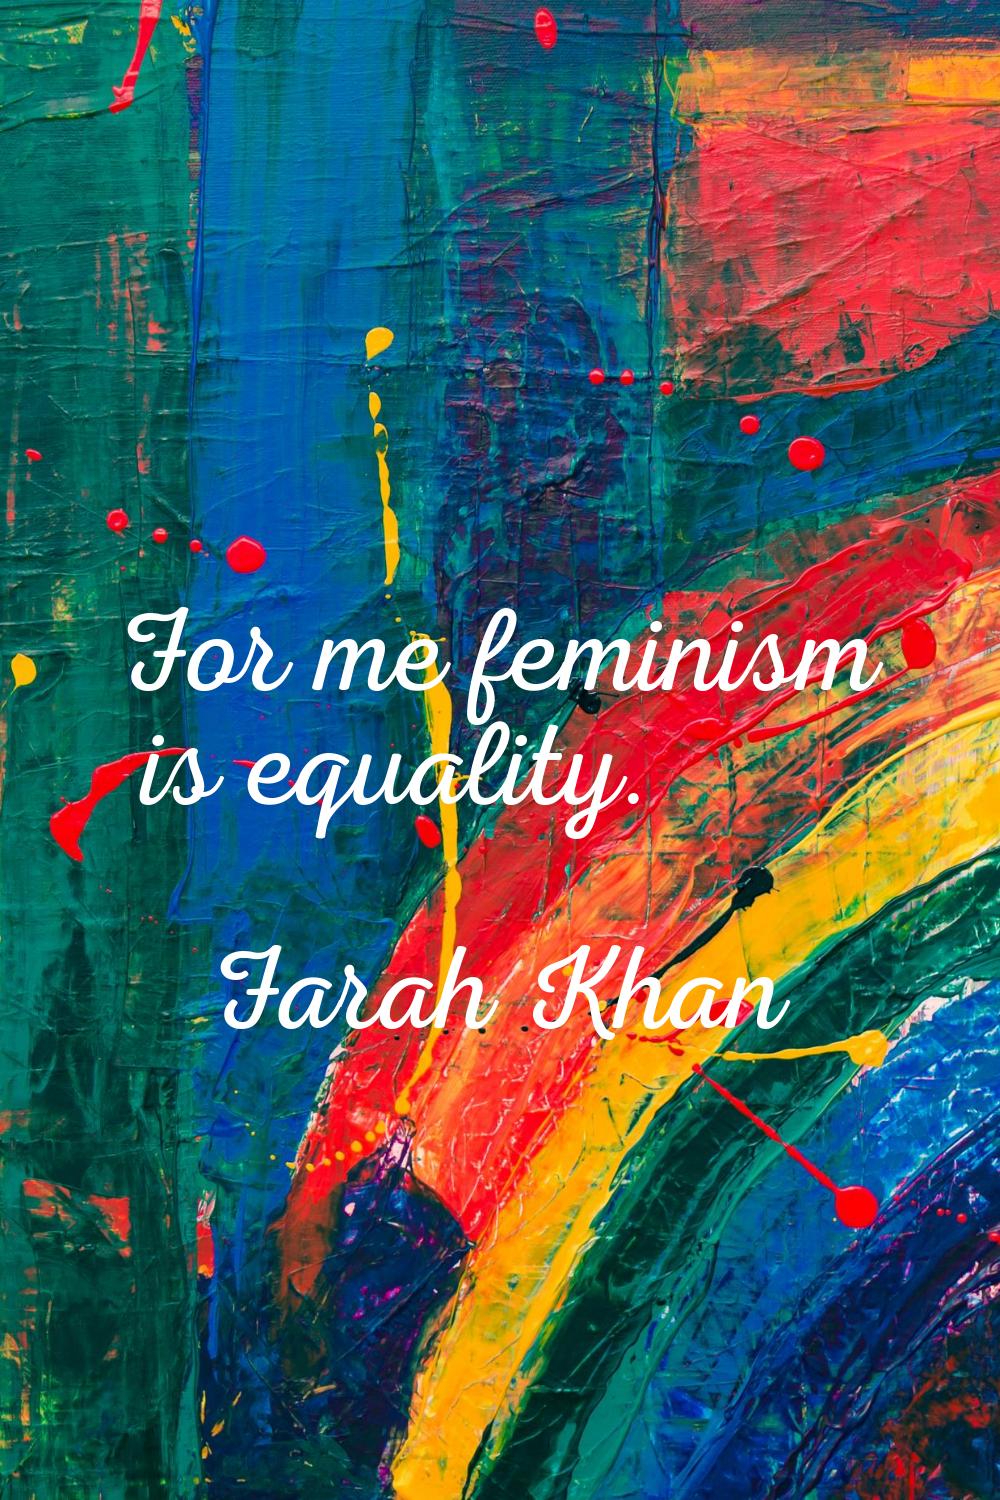 For me feminism is equality.